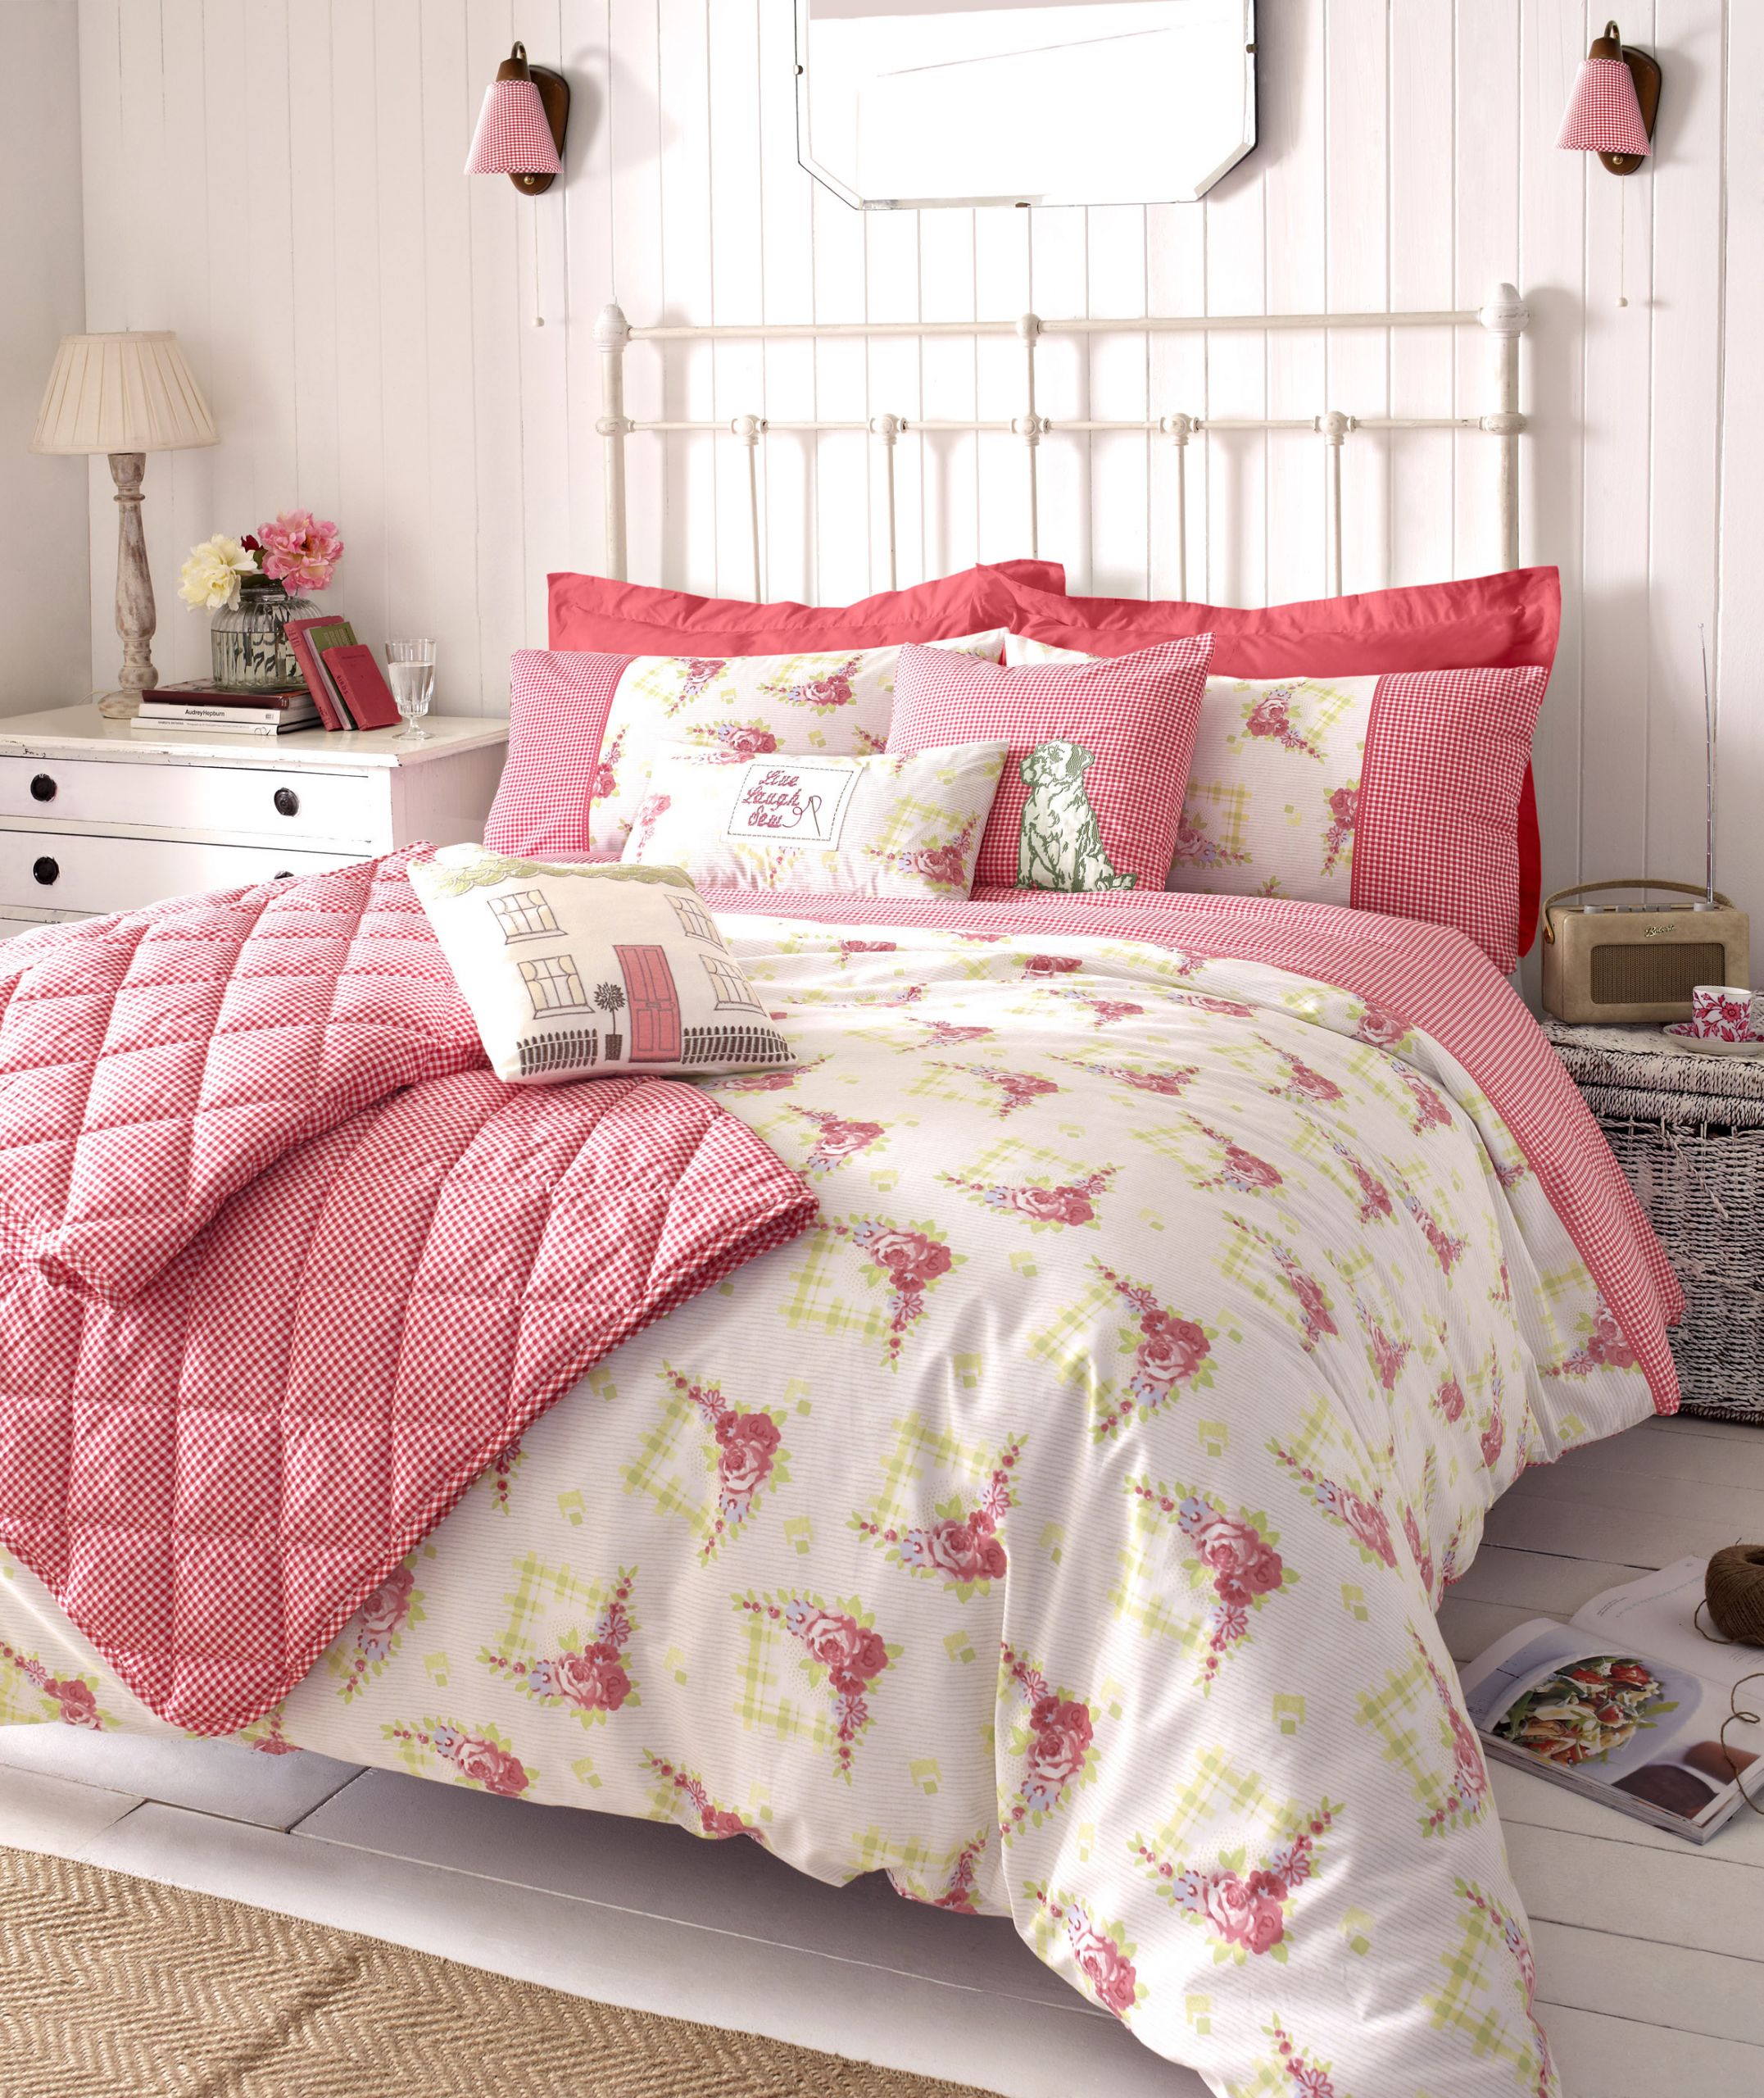 Pink Shabby Chic Bedroom
 Must Have Essentials in Bedroom